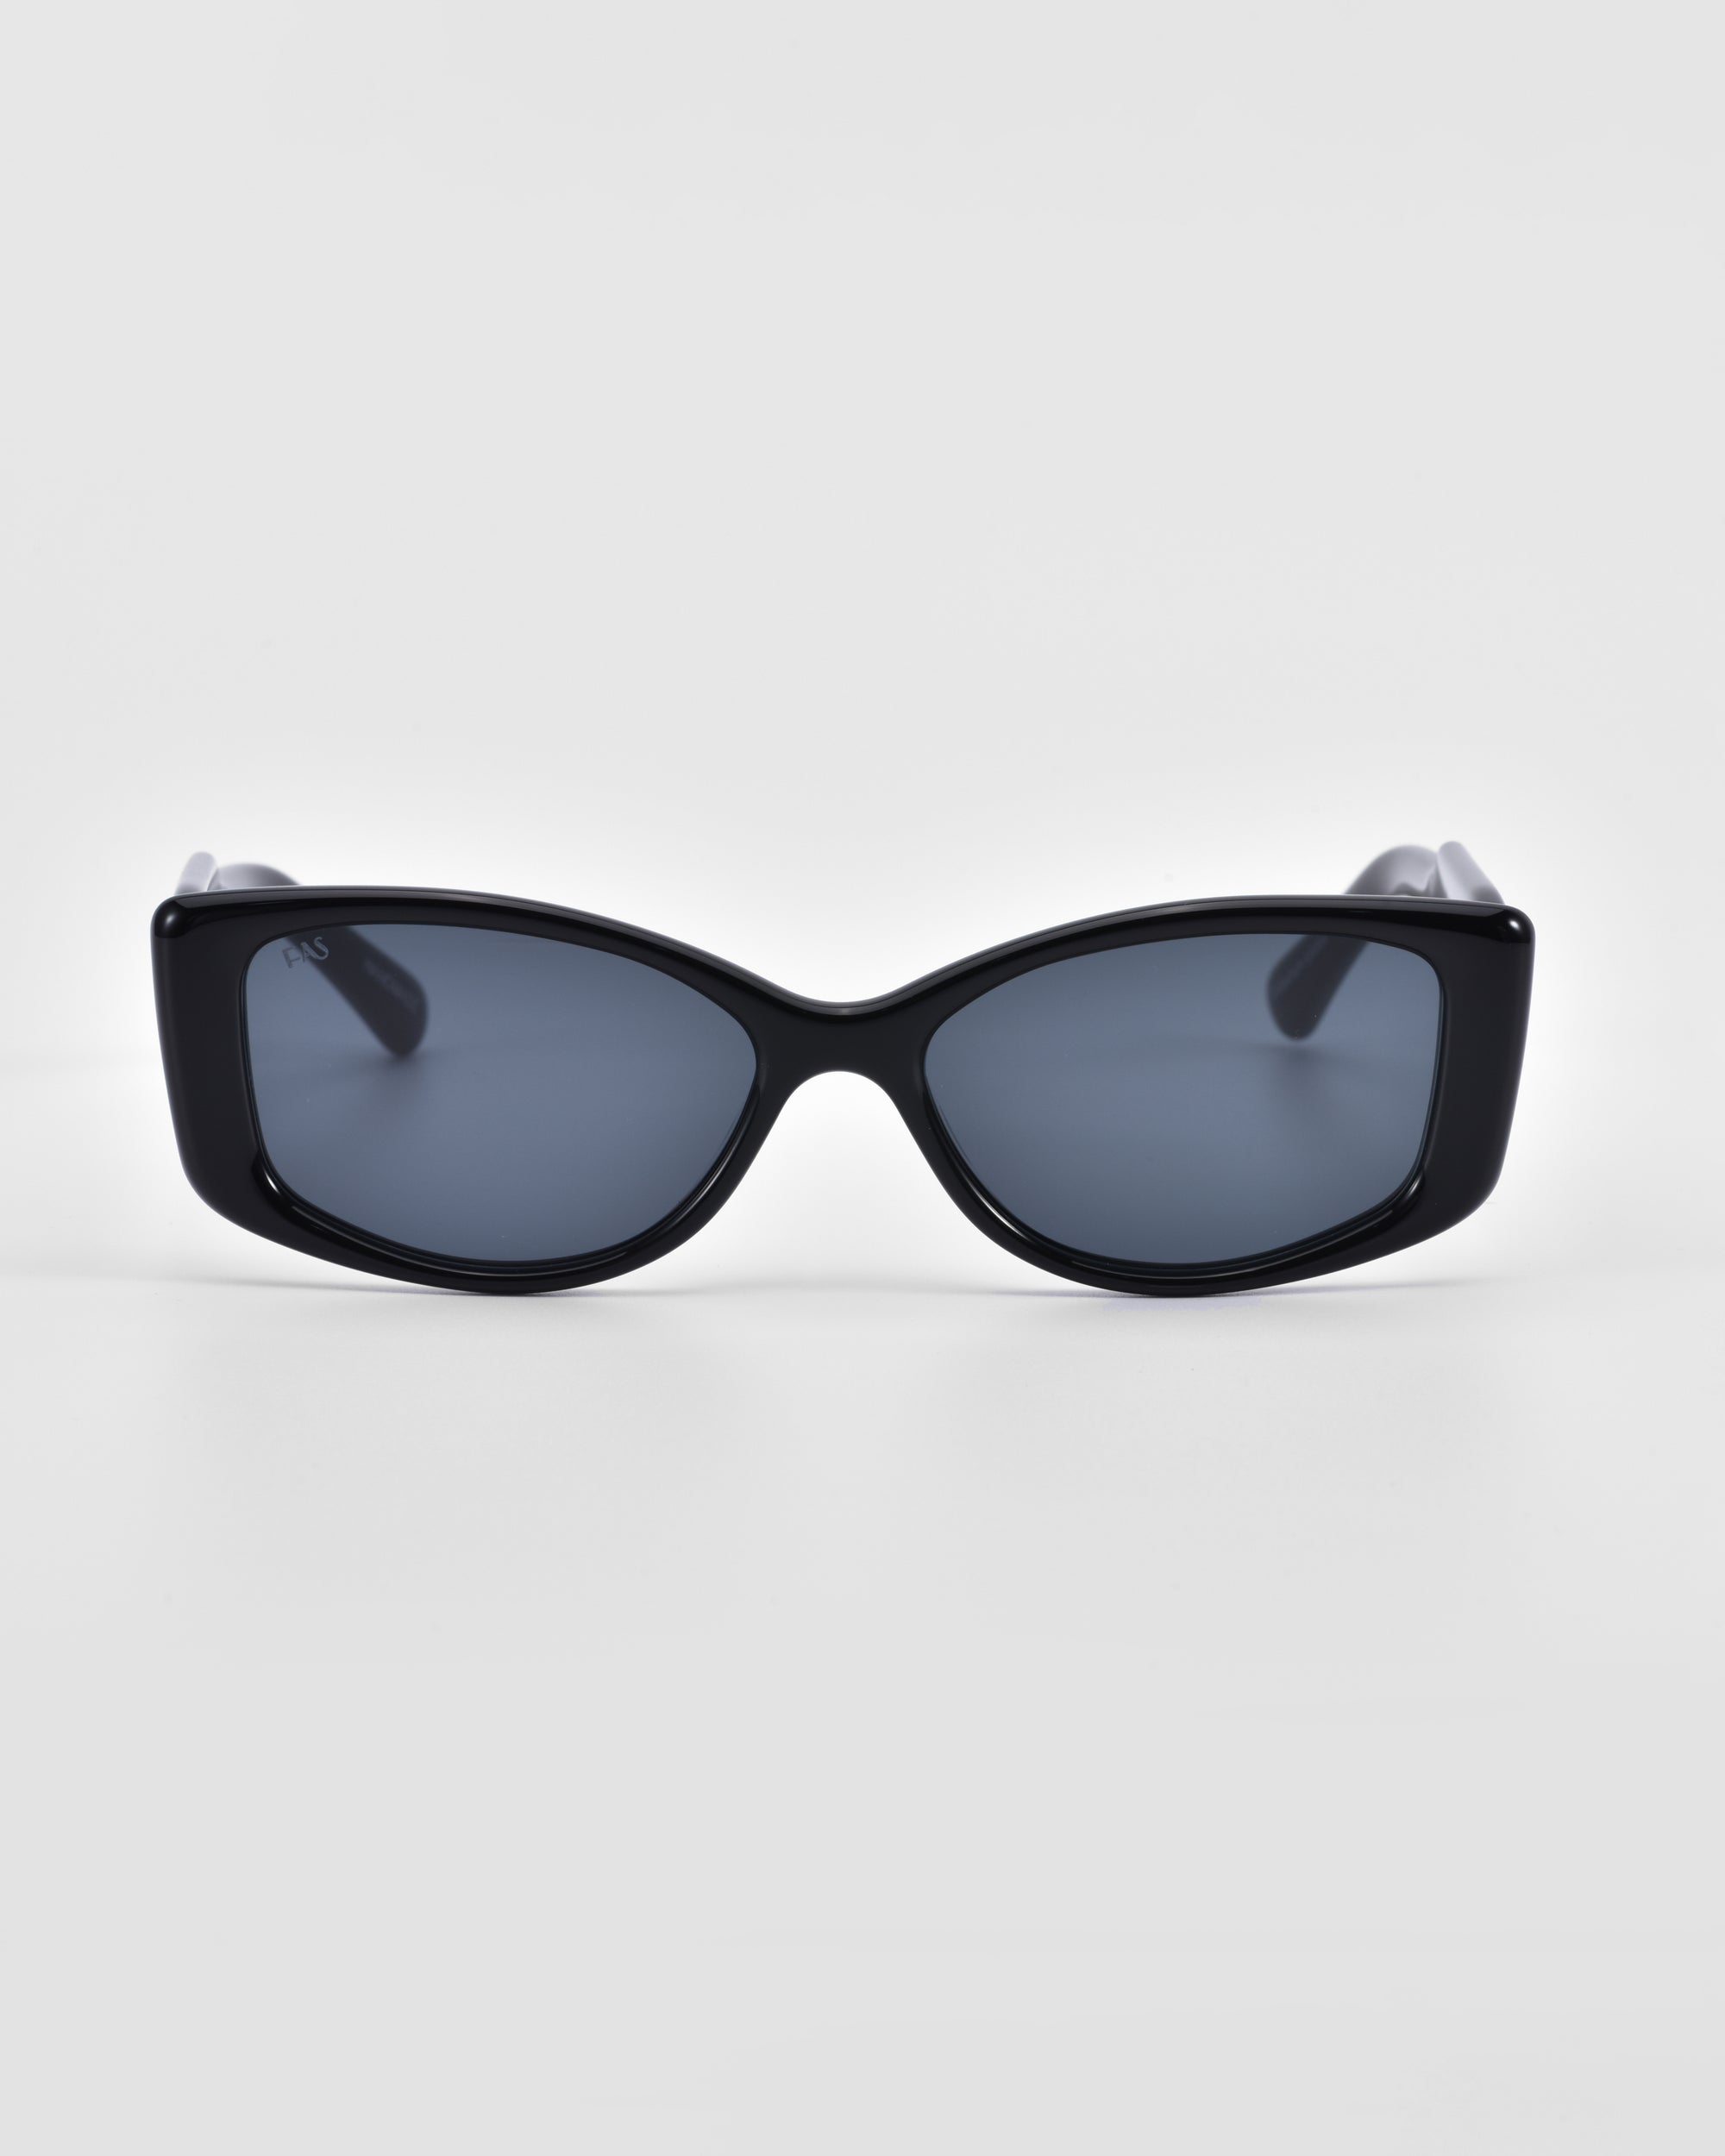 A pair of stylish black Mene sunglasses from For Art&#39;s Sake® with dark lenses is centered against a plain white background. The frame, featuring luxury frames with a sleek and slightly curved design, gives it a modern look. The sunglasses boast a simple yet fashionable style.